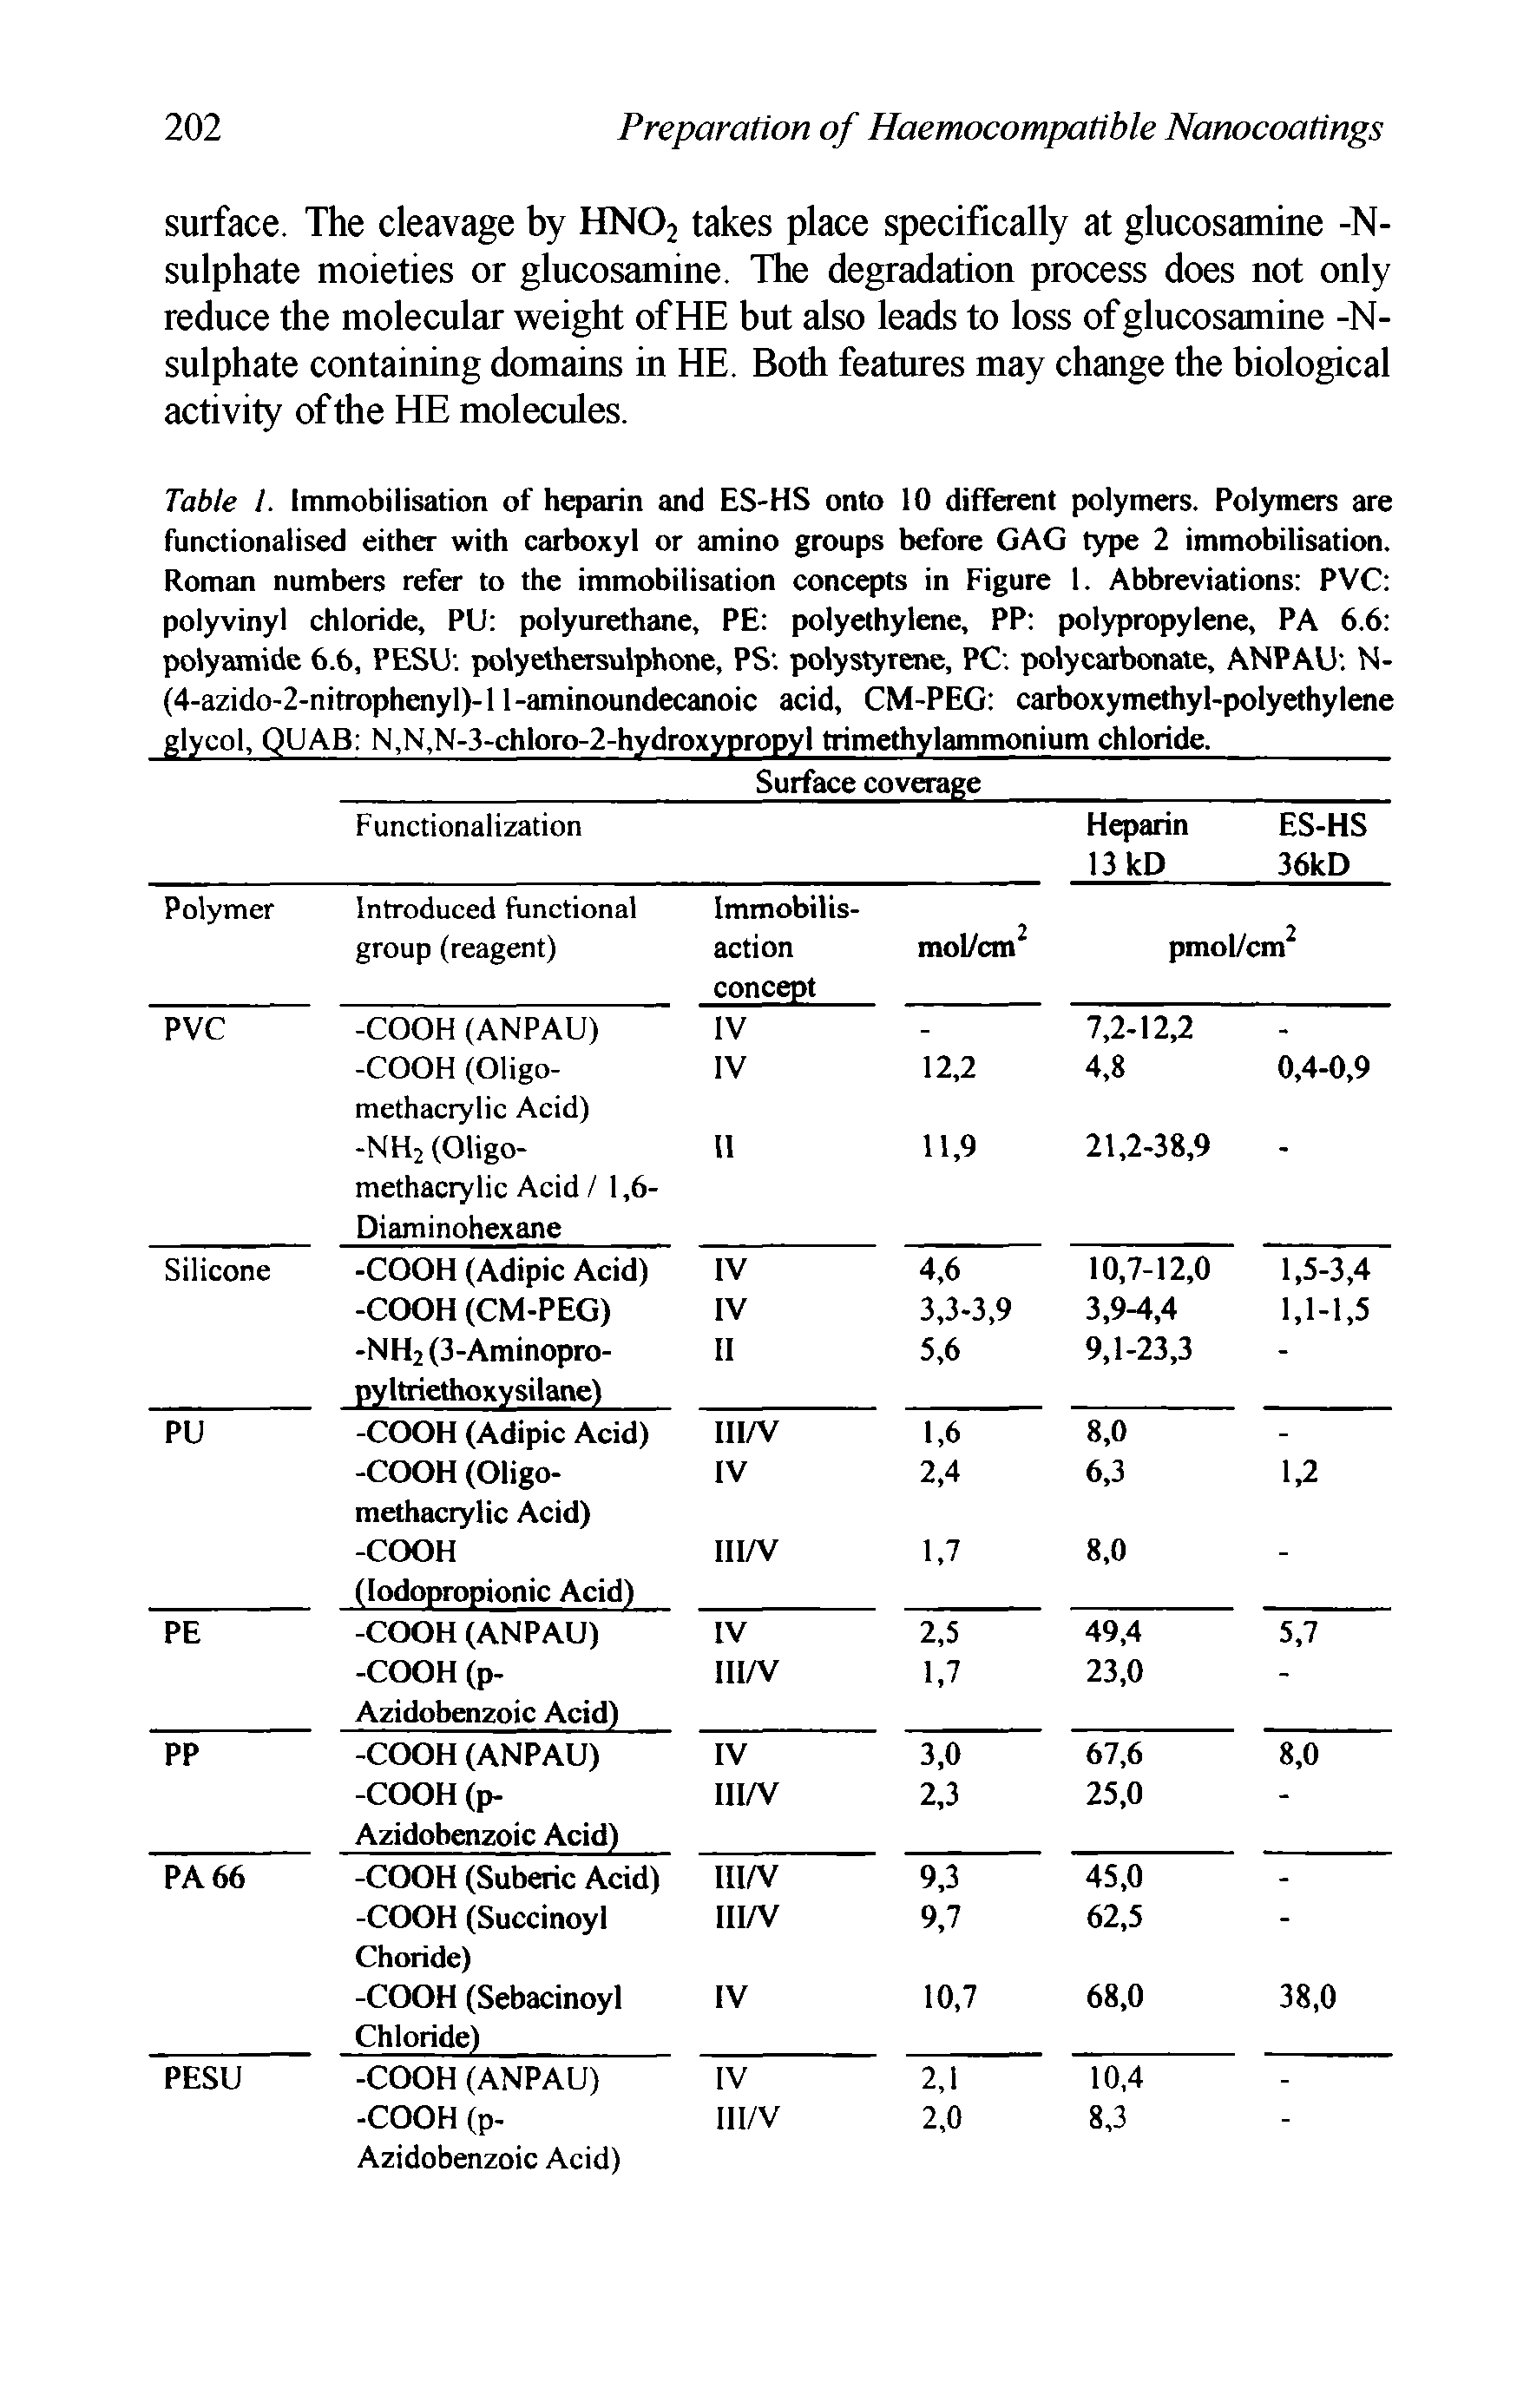 Table I. Immobilisation of heparin and ES-HS onto 10 different polymers. Poljnners are functionalised either with carboxyl or amino groups before GAG type 2 immobilisation. Roman numbers refer to the immobilisation concepts in Figure 1. Abbreviations PVC polyvinyl chloride, PU polyurethane, PE polyethylene, PP polypropylene, PA 6.6 polyamide 6.6, PESU polyethersulphone, PS polystyrene, PC polycarbonate, ANPAU N-(4-azido-2-nitrophoiyl)-l 1-aminoundecanoic acid, CM-PEG carboxymethyl-poly hylene...